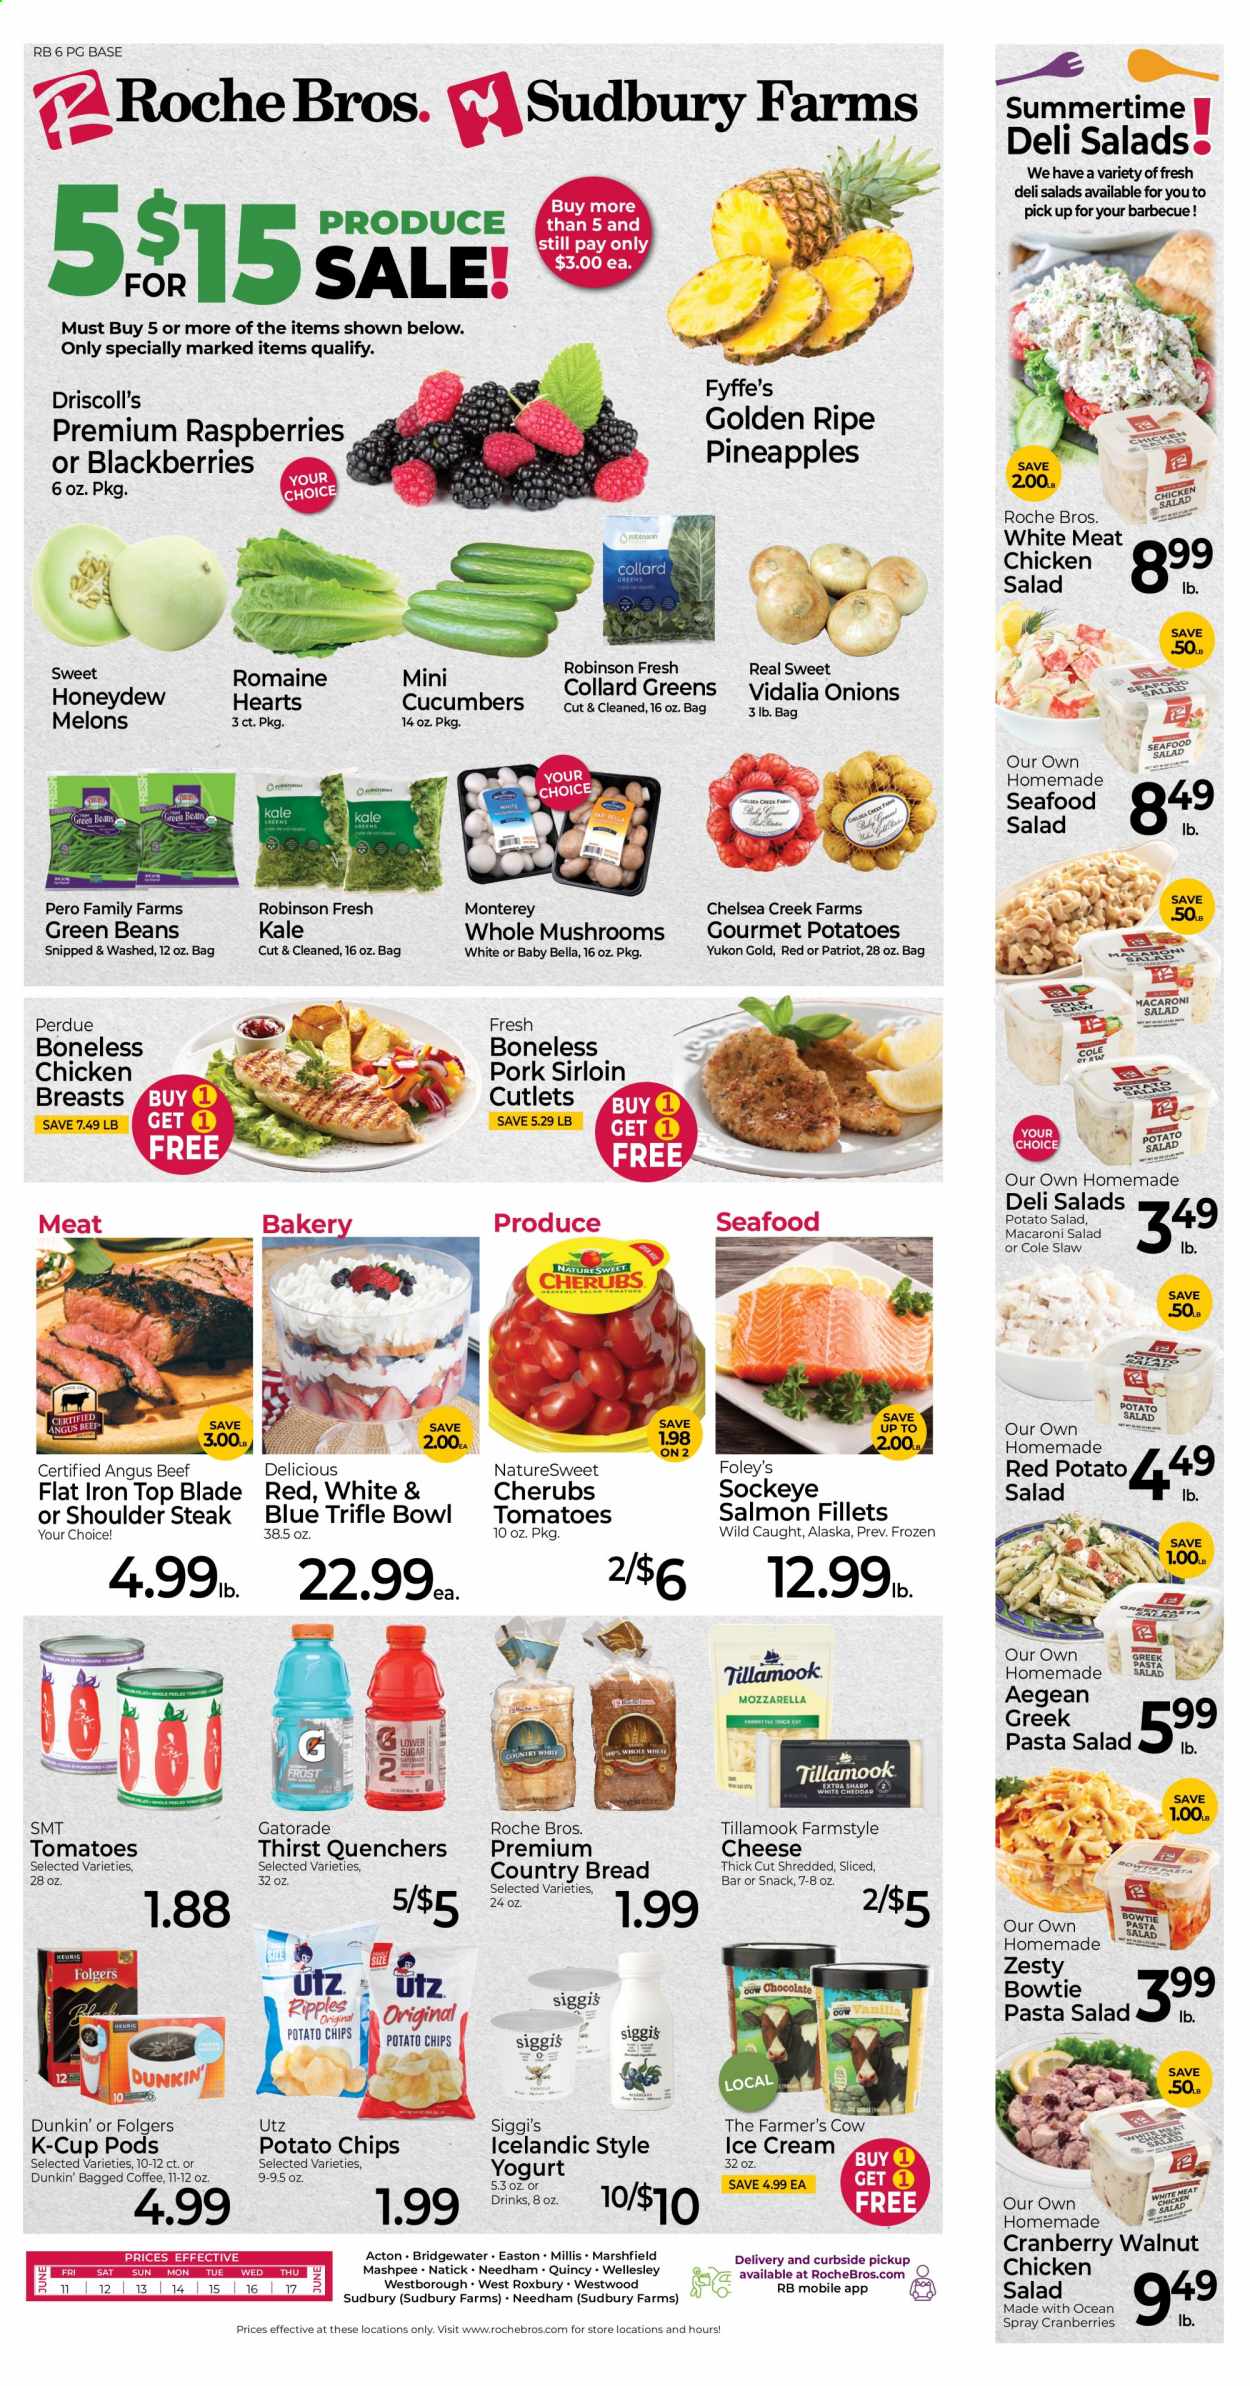 thumbnail - Roche Bros. Flyer - 06/11/2021 - 06/17/2021 - Sales products - mushrooms, bread, cucumber, collard greens, green beans, tomatoes, kale, onion, blackberries, raspberries, honeydew, pineapple, salmon, salmon fillet, seafood, pasta, Perdue®, potato salad, macaroni salad, seafood salad, pasta salad, chicken salad, cheese, yoghurt, ice cream, potato chips, cranberries, Gatorade, Folgers, coffee capsules, K-Cups, bagged coffee, chicken breasts, beef meat, steak, top blade, pork loin, bowl, melons. Page 1.